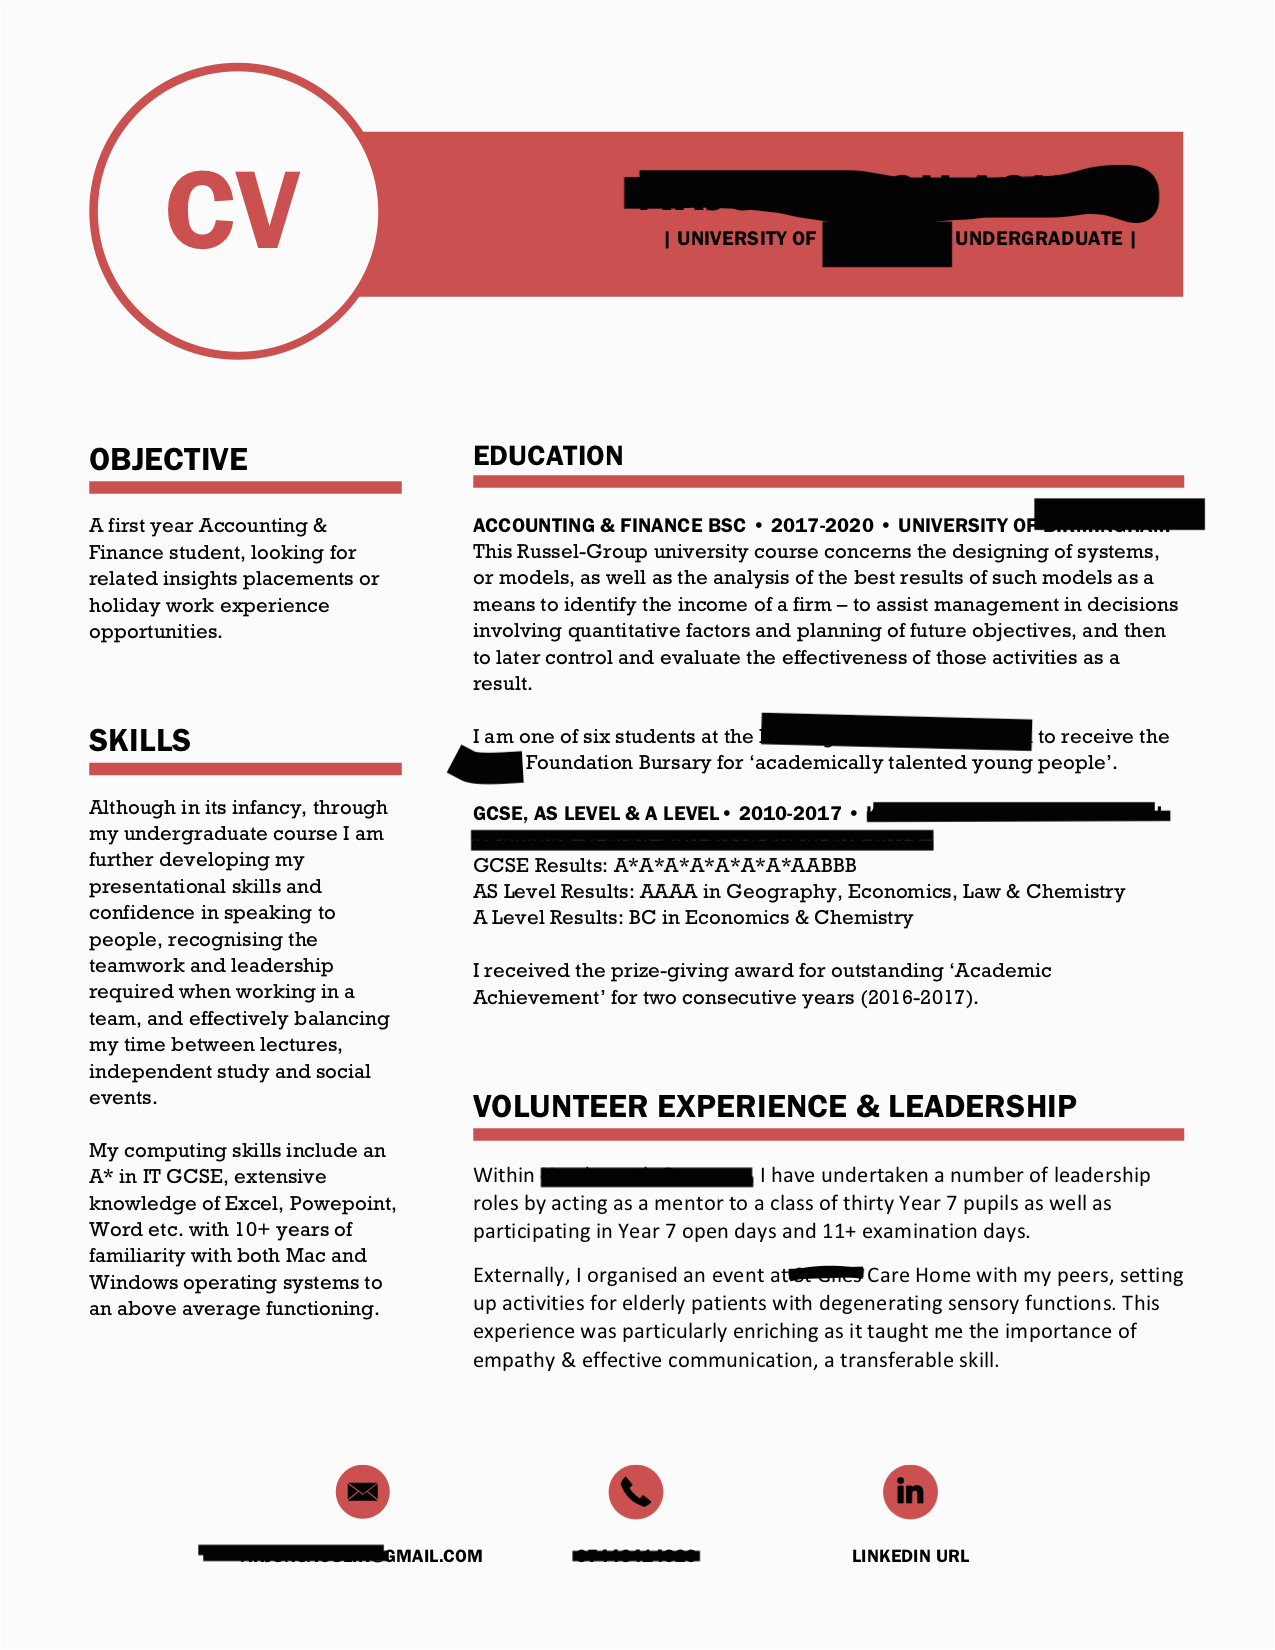 Resume Sample who Never Had A Job I Ve Never Had A Job or Work Experience is My Cv Resume Good Enough to